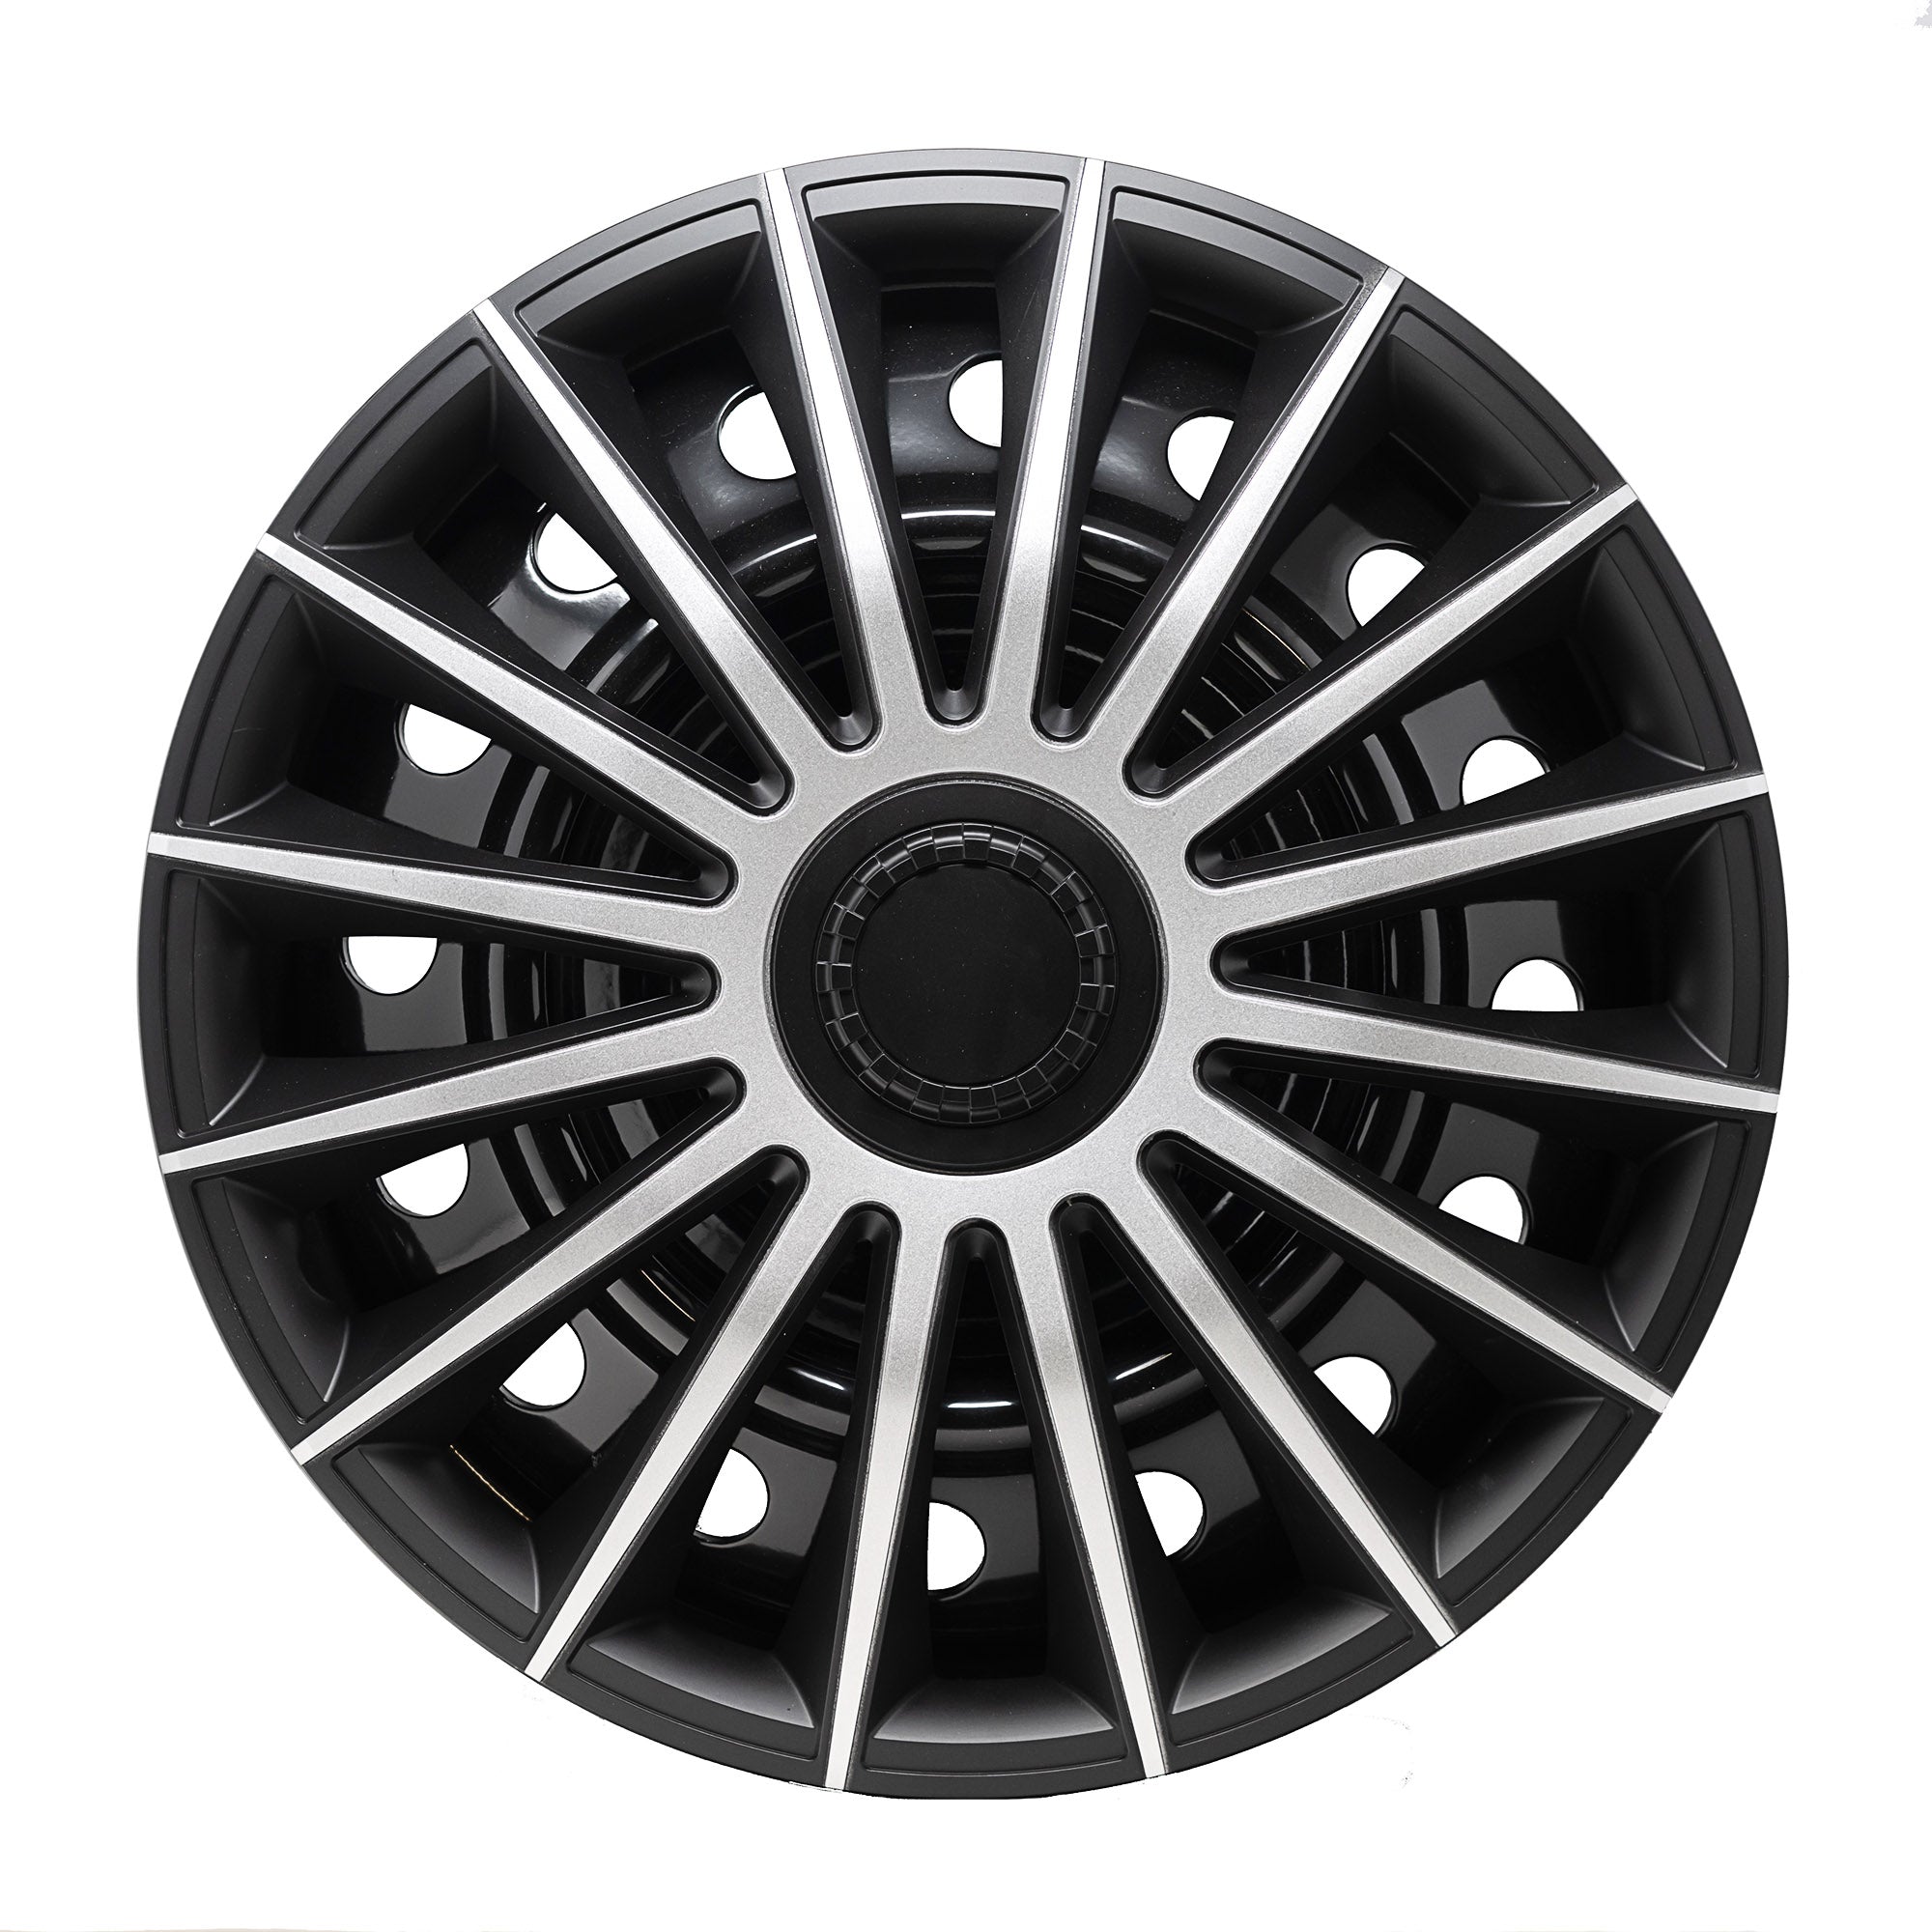 Alpena 58287 Le Mans Black-Silver Wheel Cover Kit 17-Inches Pack o - 1